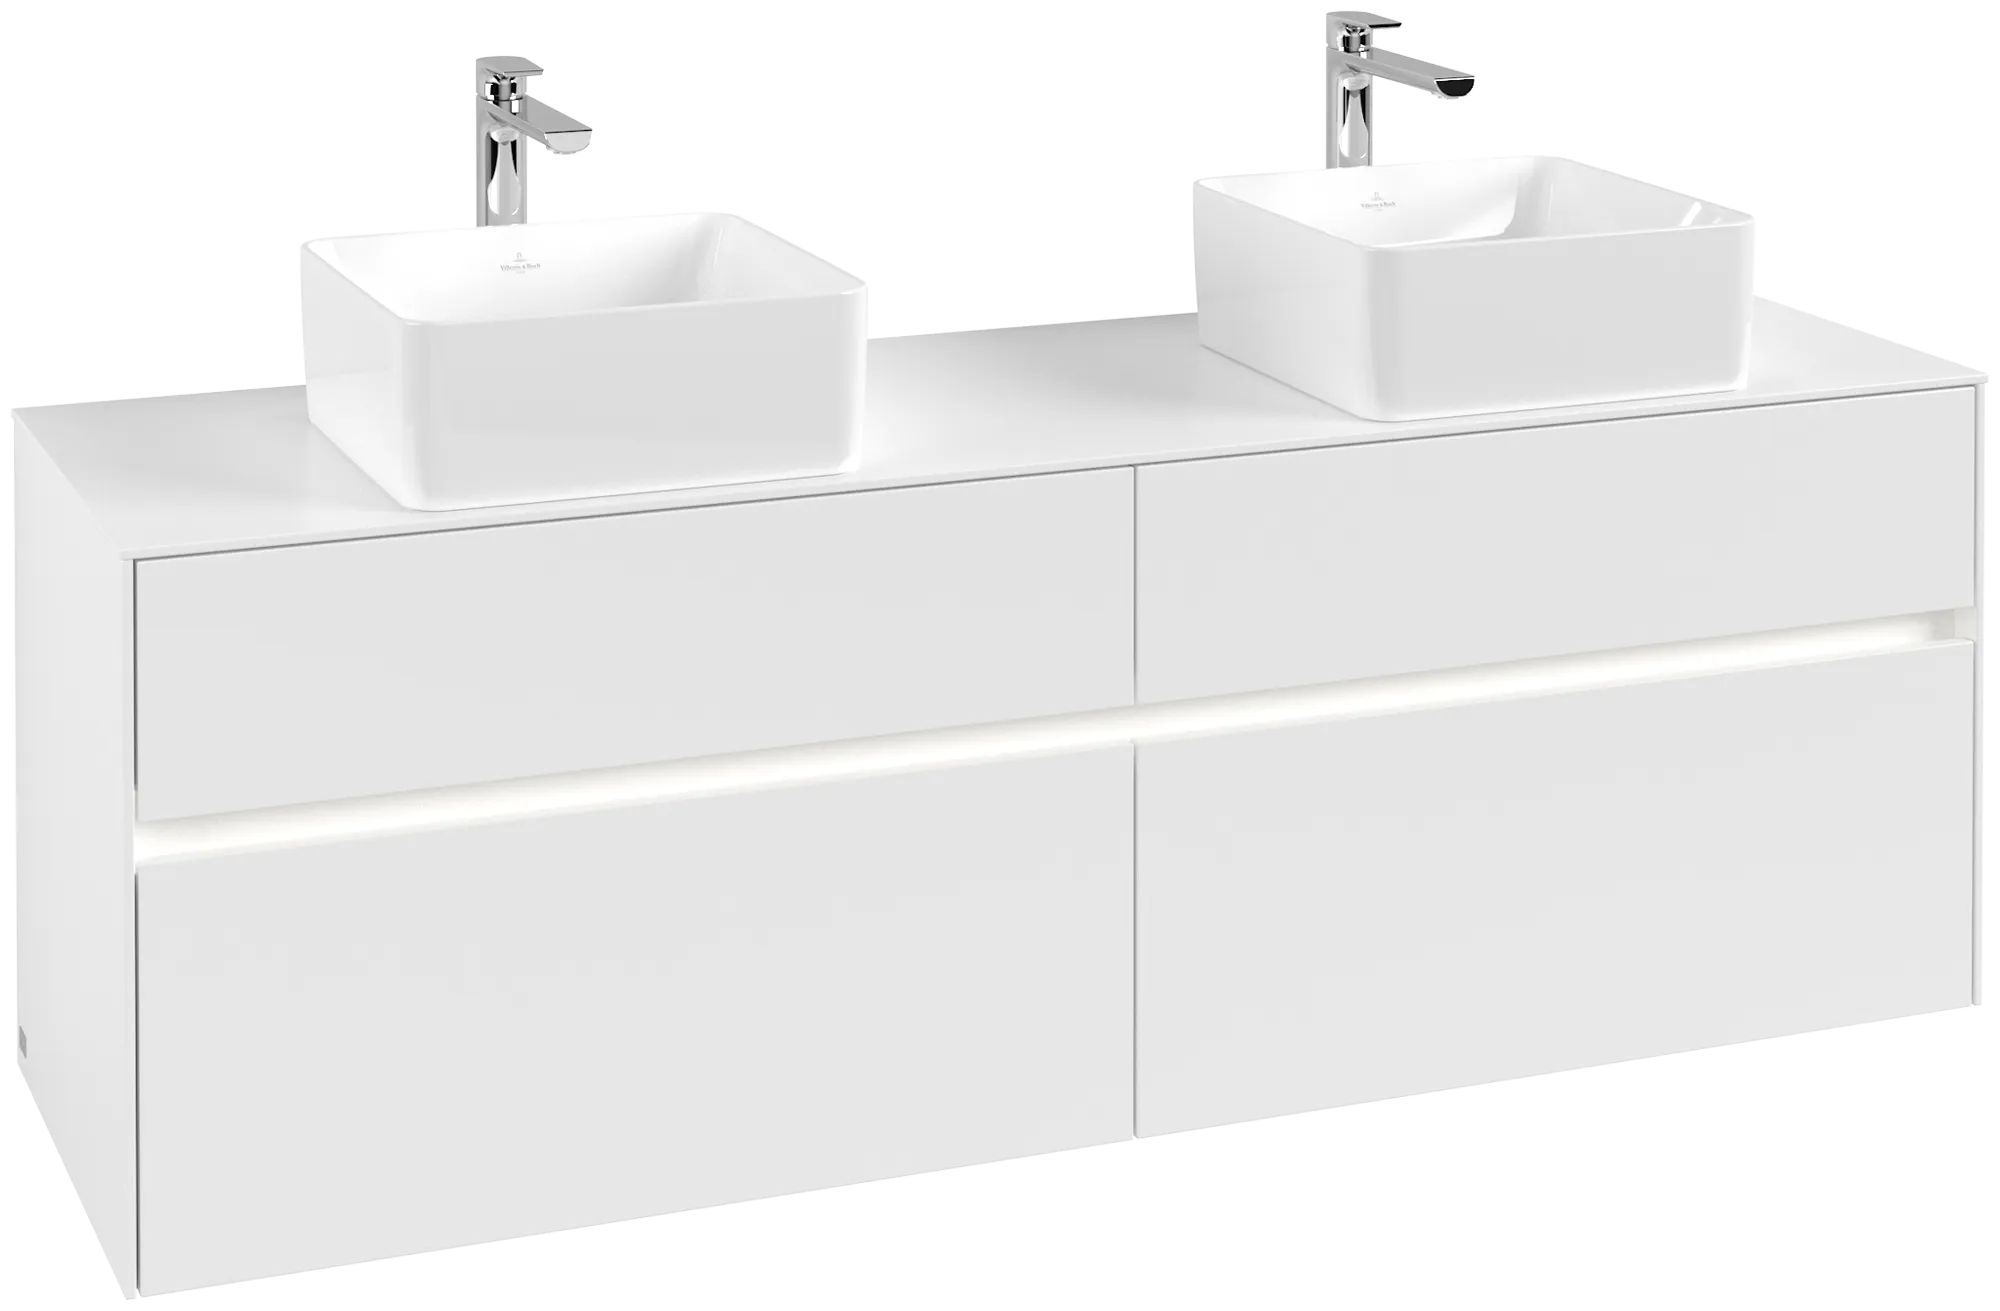 Picture of VILLEROY BOCH Collaro Vanity unit, with lighting, 4 pull-out compartments, 1600 x 548 x 500 mm, White Matt / White Matt #C052B0MS